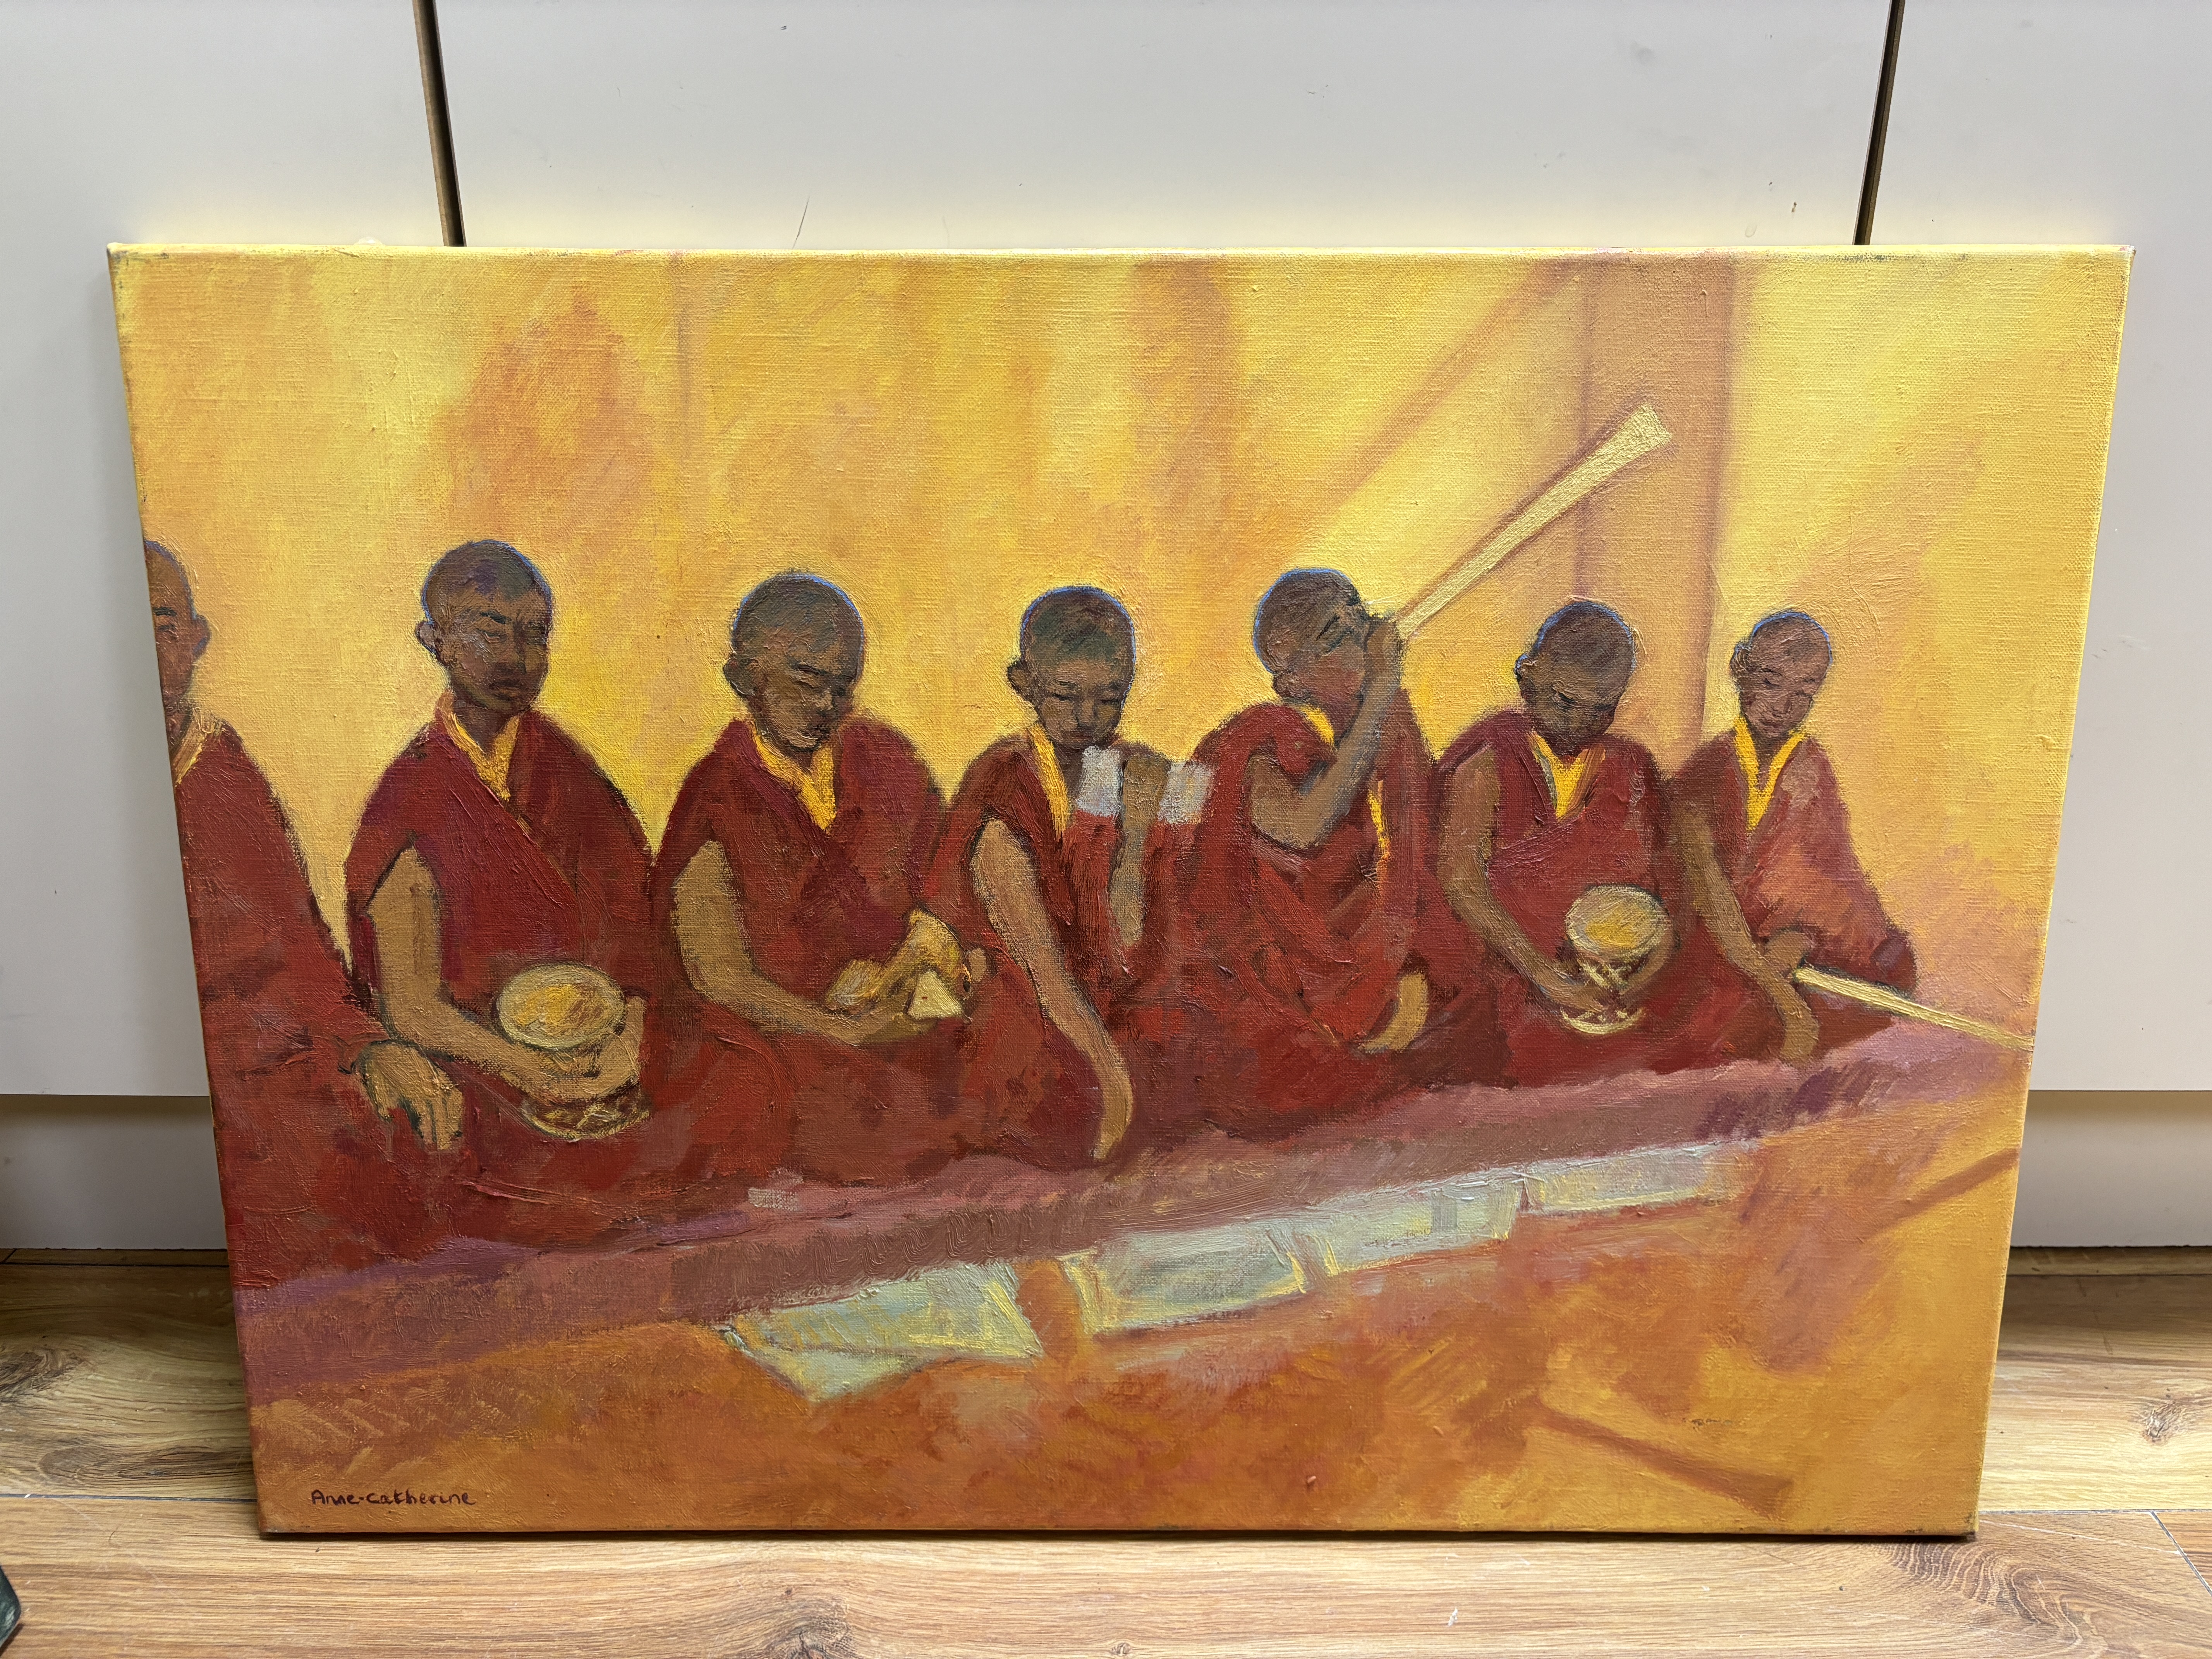 Anne-Catherine Phillips (20th. C), oil on canvas, Buddhist monks, signed, 50 x 70cm, unframed